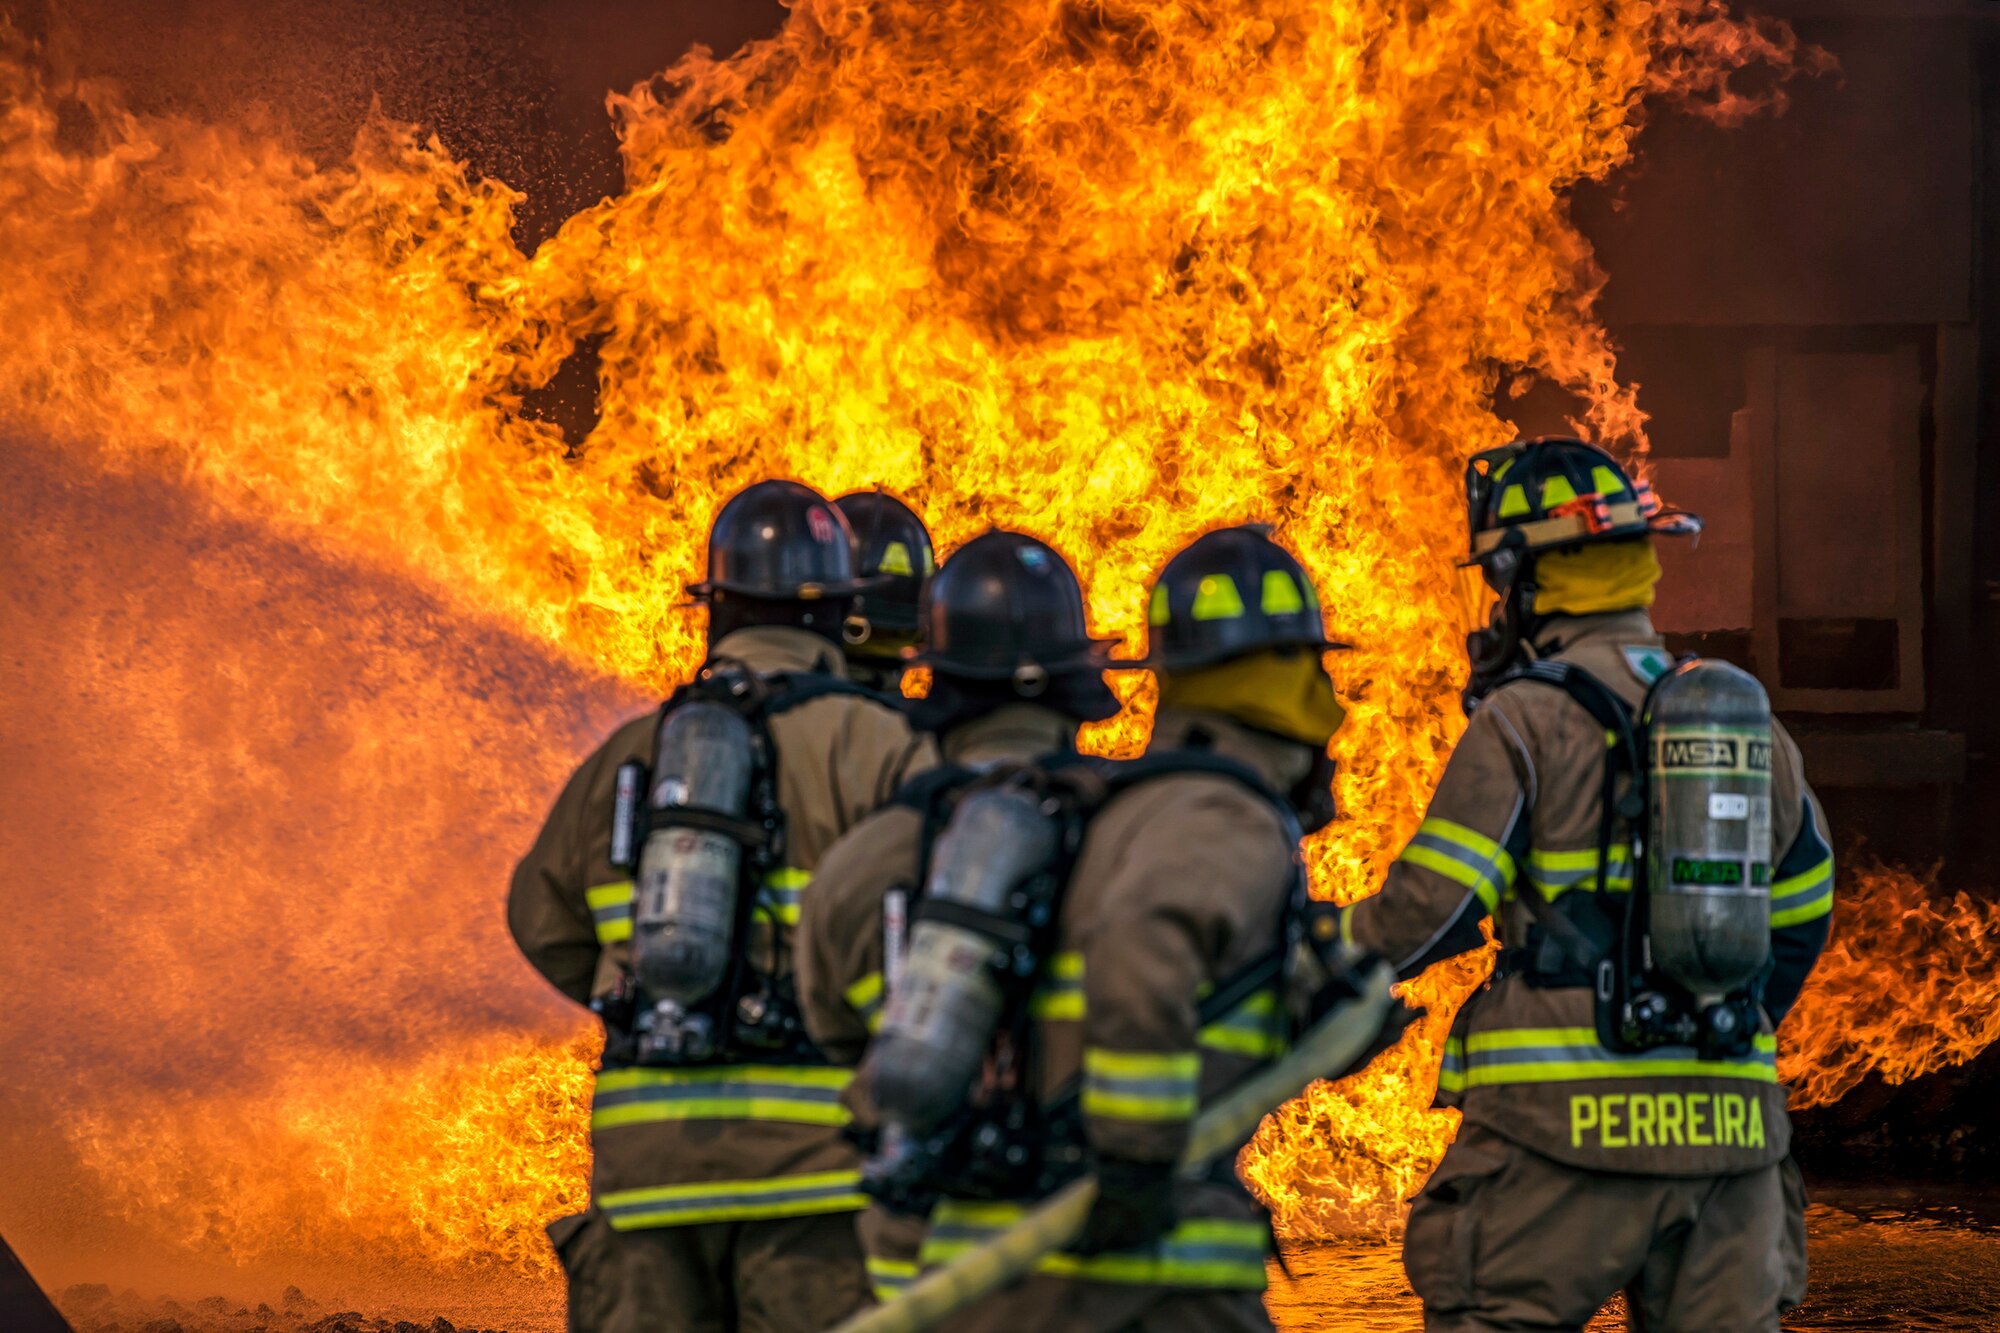 Firefighters assigned to the 23rd Civil Engineer Squadron extinguish an aircraft fire during live-fire training, April 24, 2018, at Moody Air Force Base, Ga. Firefighters from the 23rd CES and Valdosta Fire Department participated in the training to gain more experience fighting aircraft fires and to work together as a cohesive team while still practicing proper and safe firefighting techniques. (U.S. Air Force photo by Airman 1st Class Eugene Oliver)